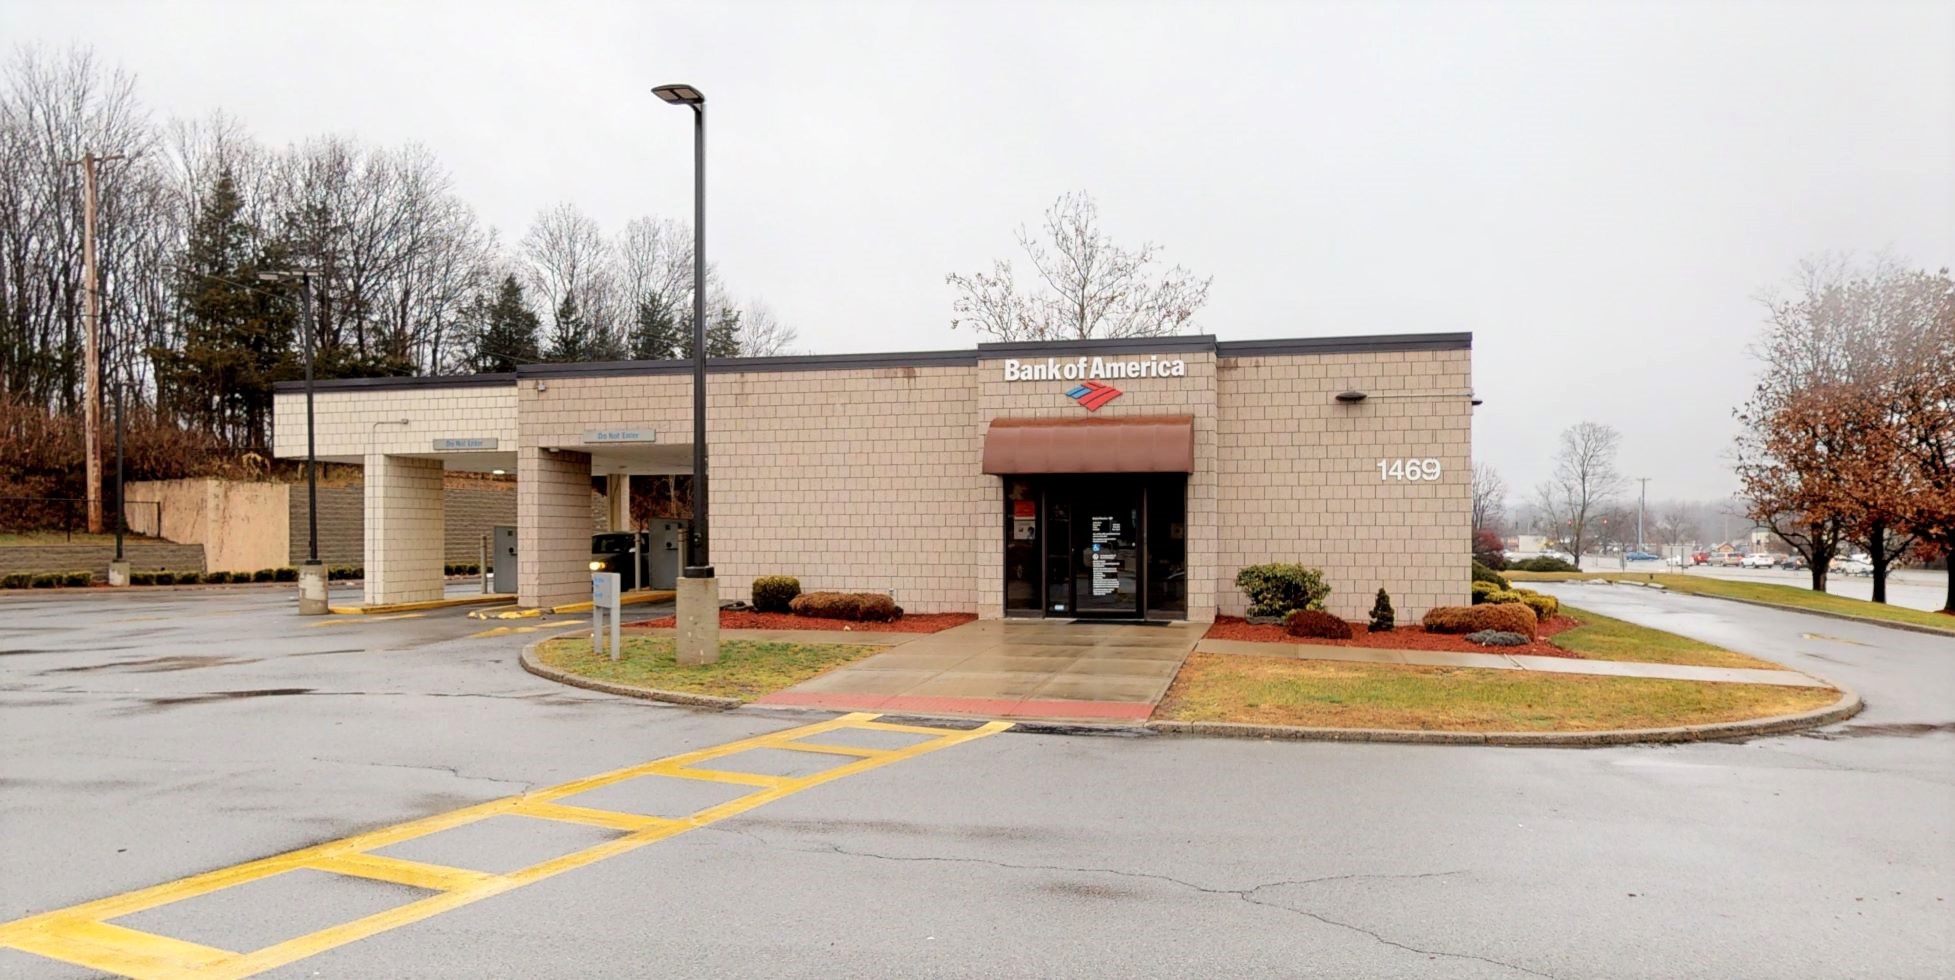 Bank of America financial center with drive-thru ATM | 1469 Route 9, Wappingers Falls, NY 12590